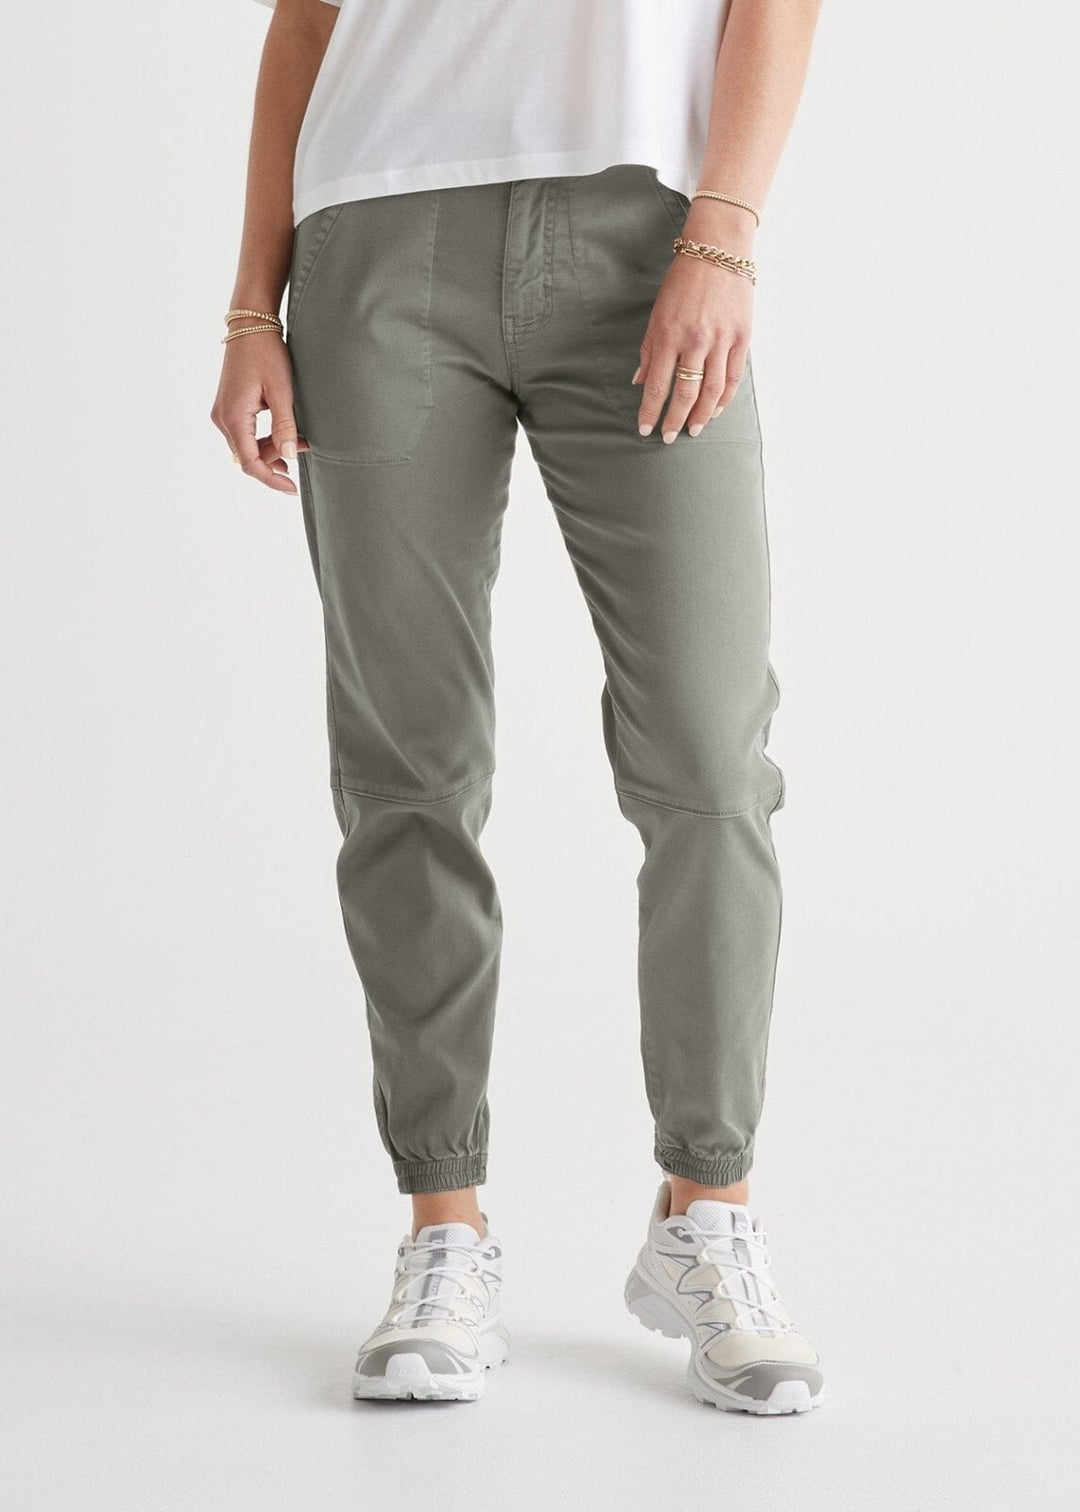 Duer Women's Live Free High Rise Jogger